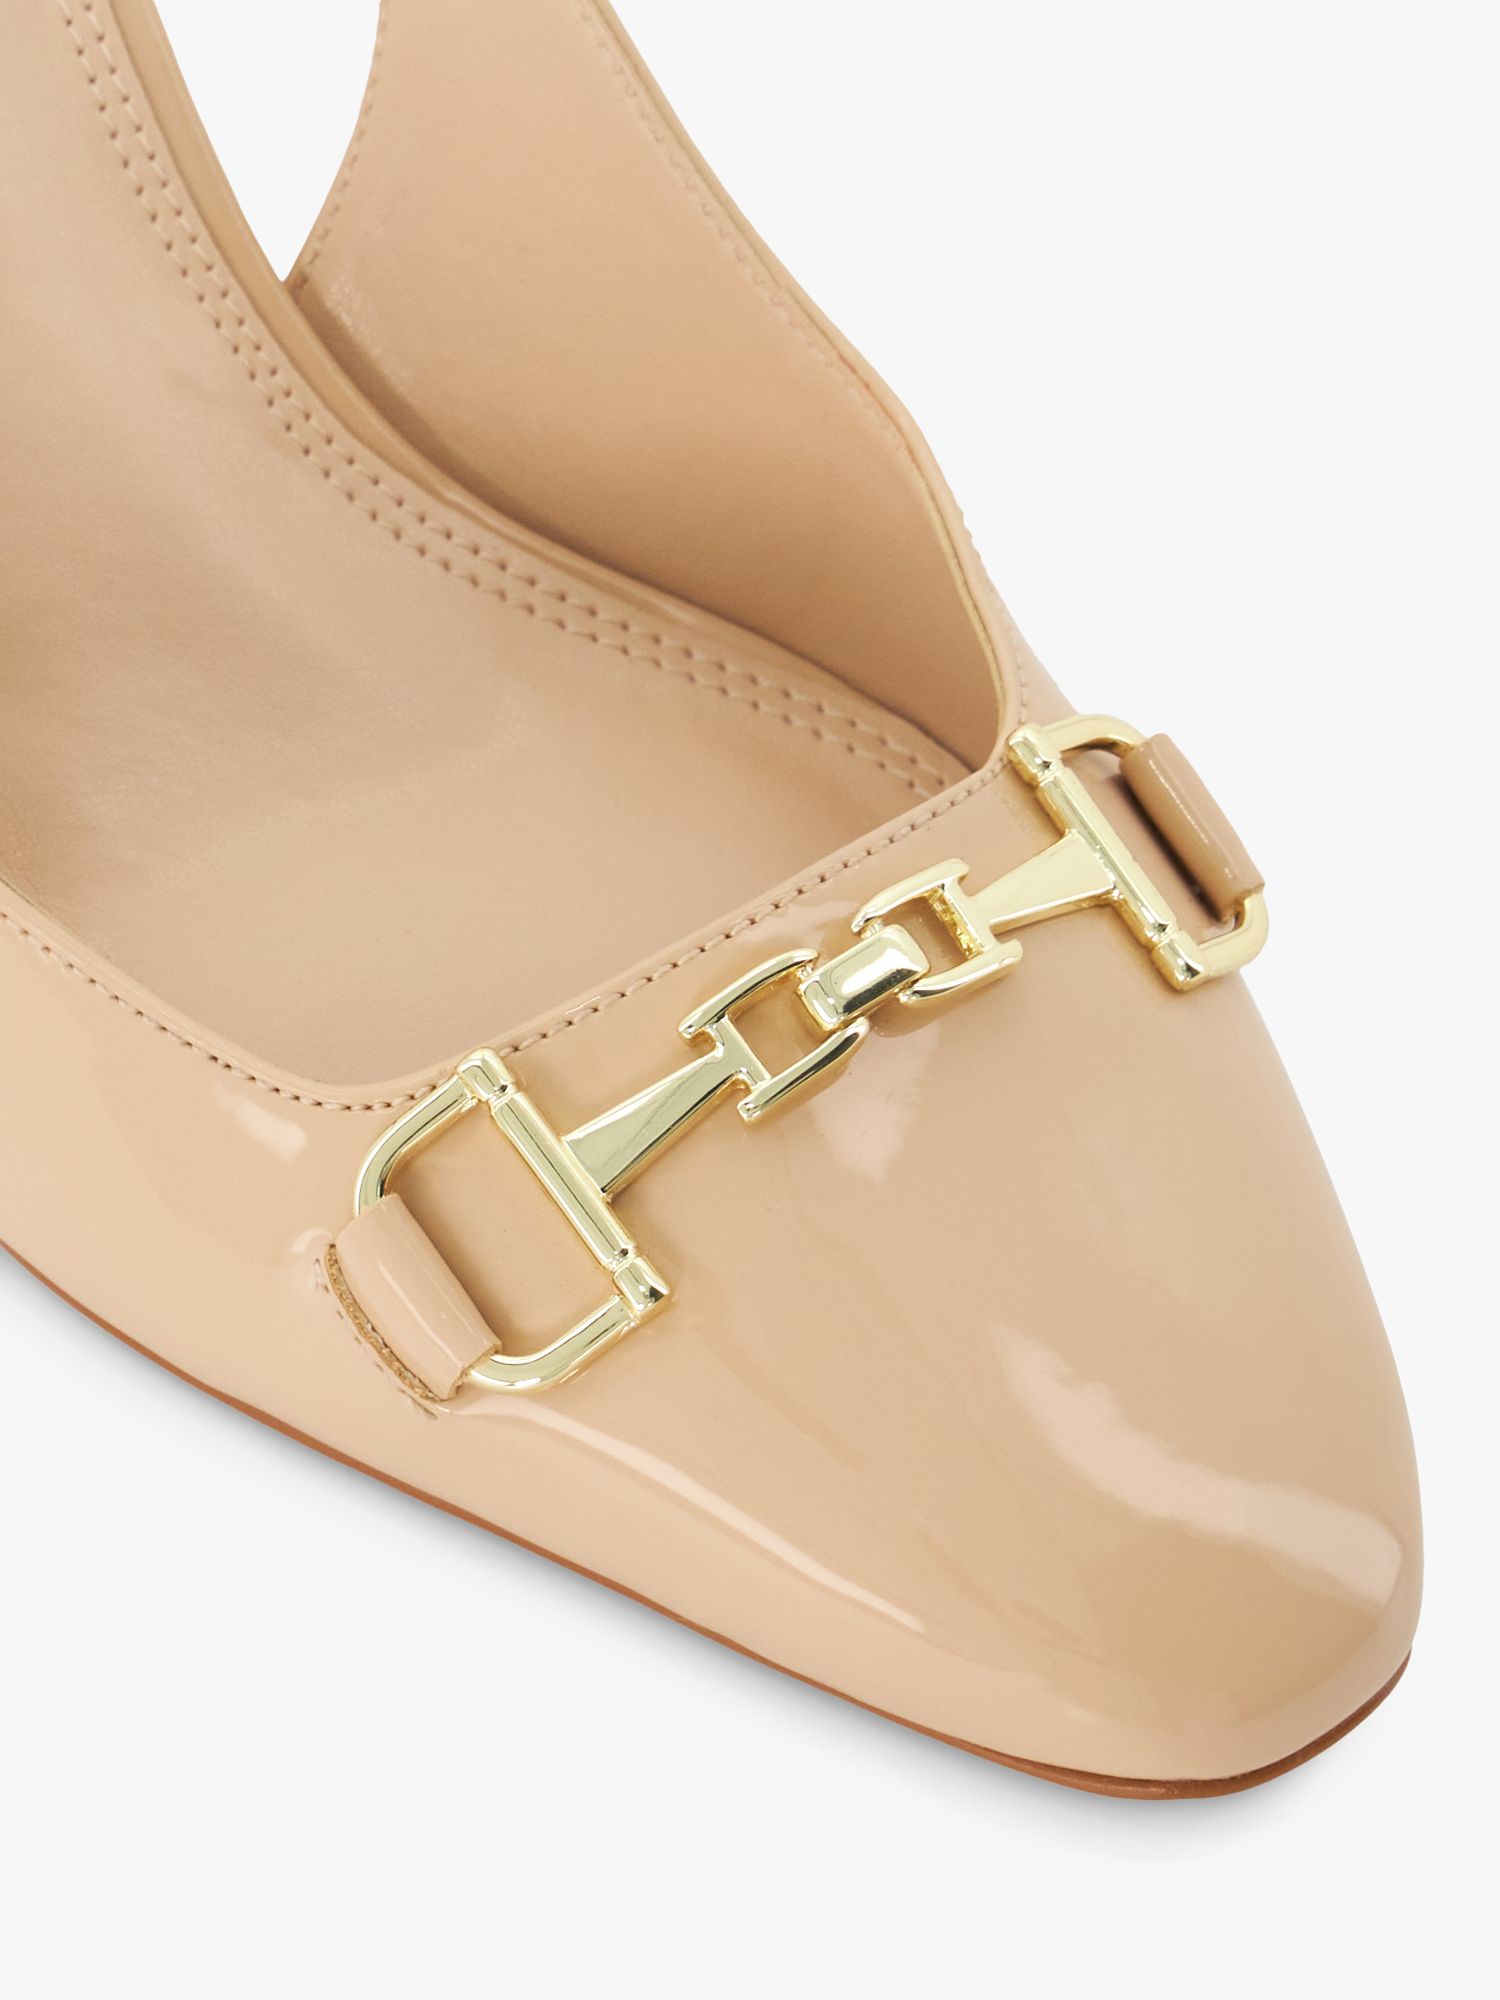 Buy Dune Wide Fit Detailed Court Shoes, Blush Patent Online at johnlewis.com